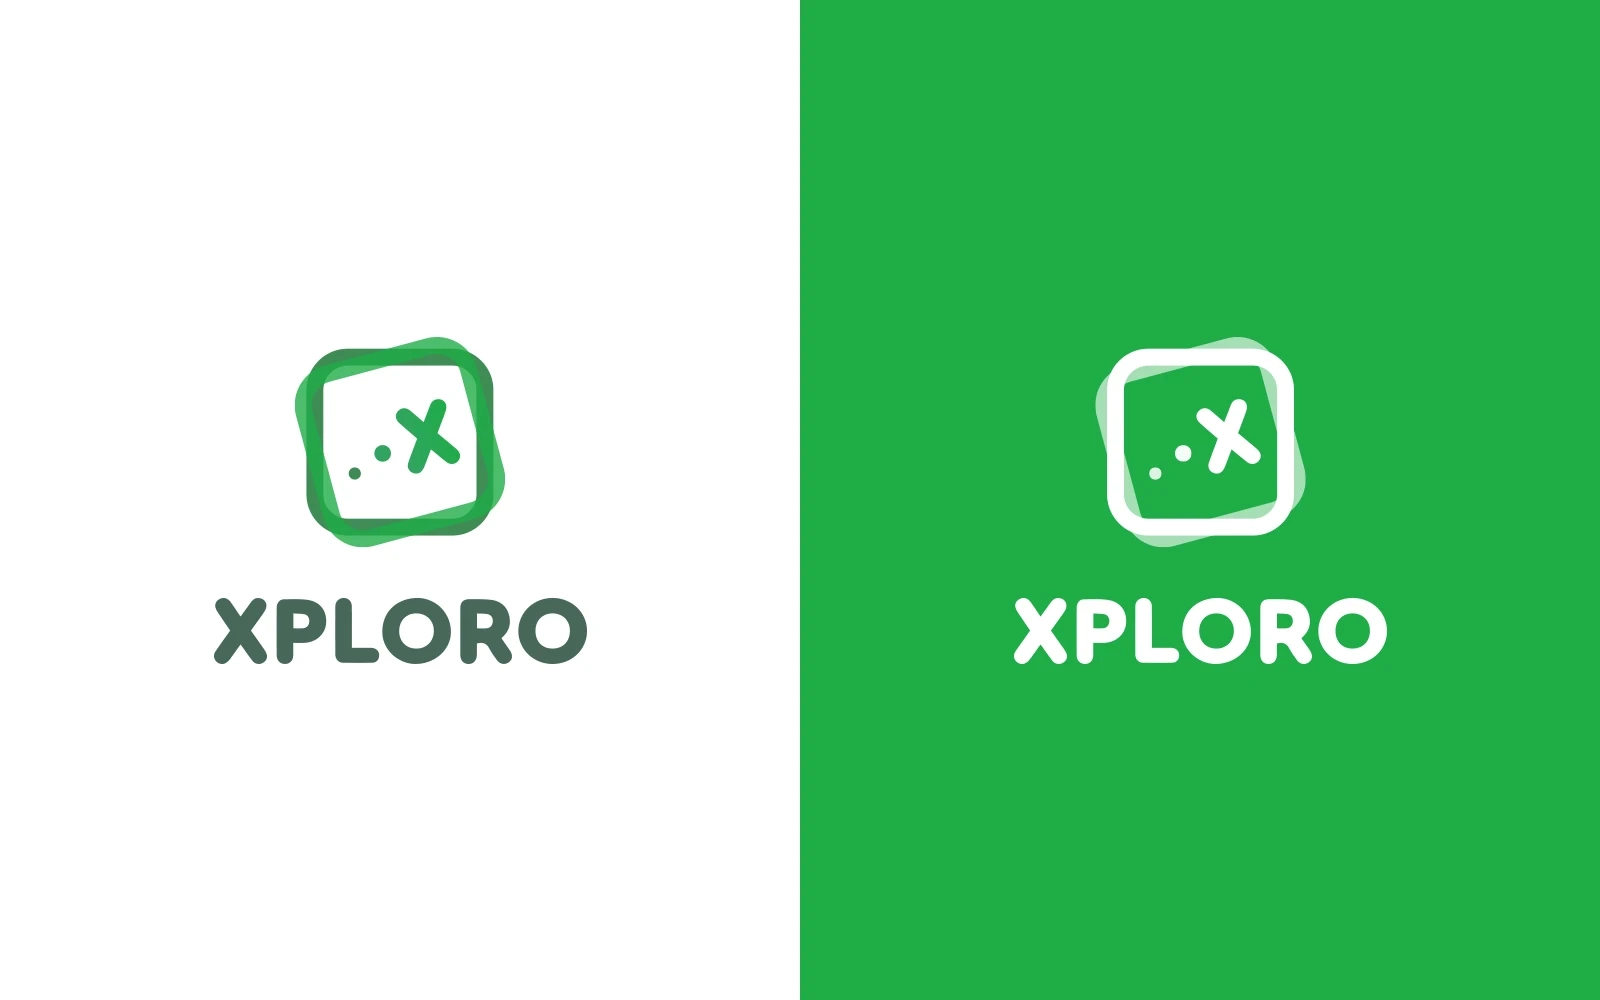 The Xploro logo split into two versions, one with the logo in green on a white background, the other is white on a green background